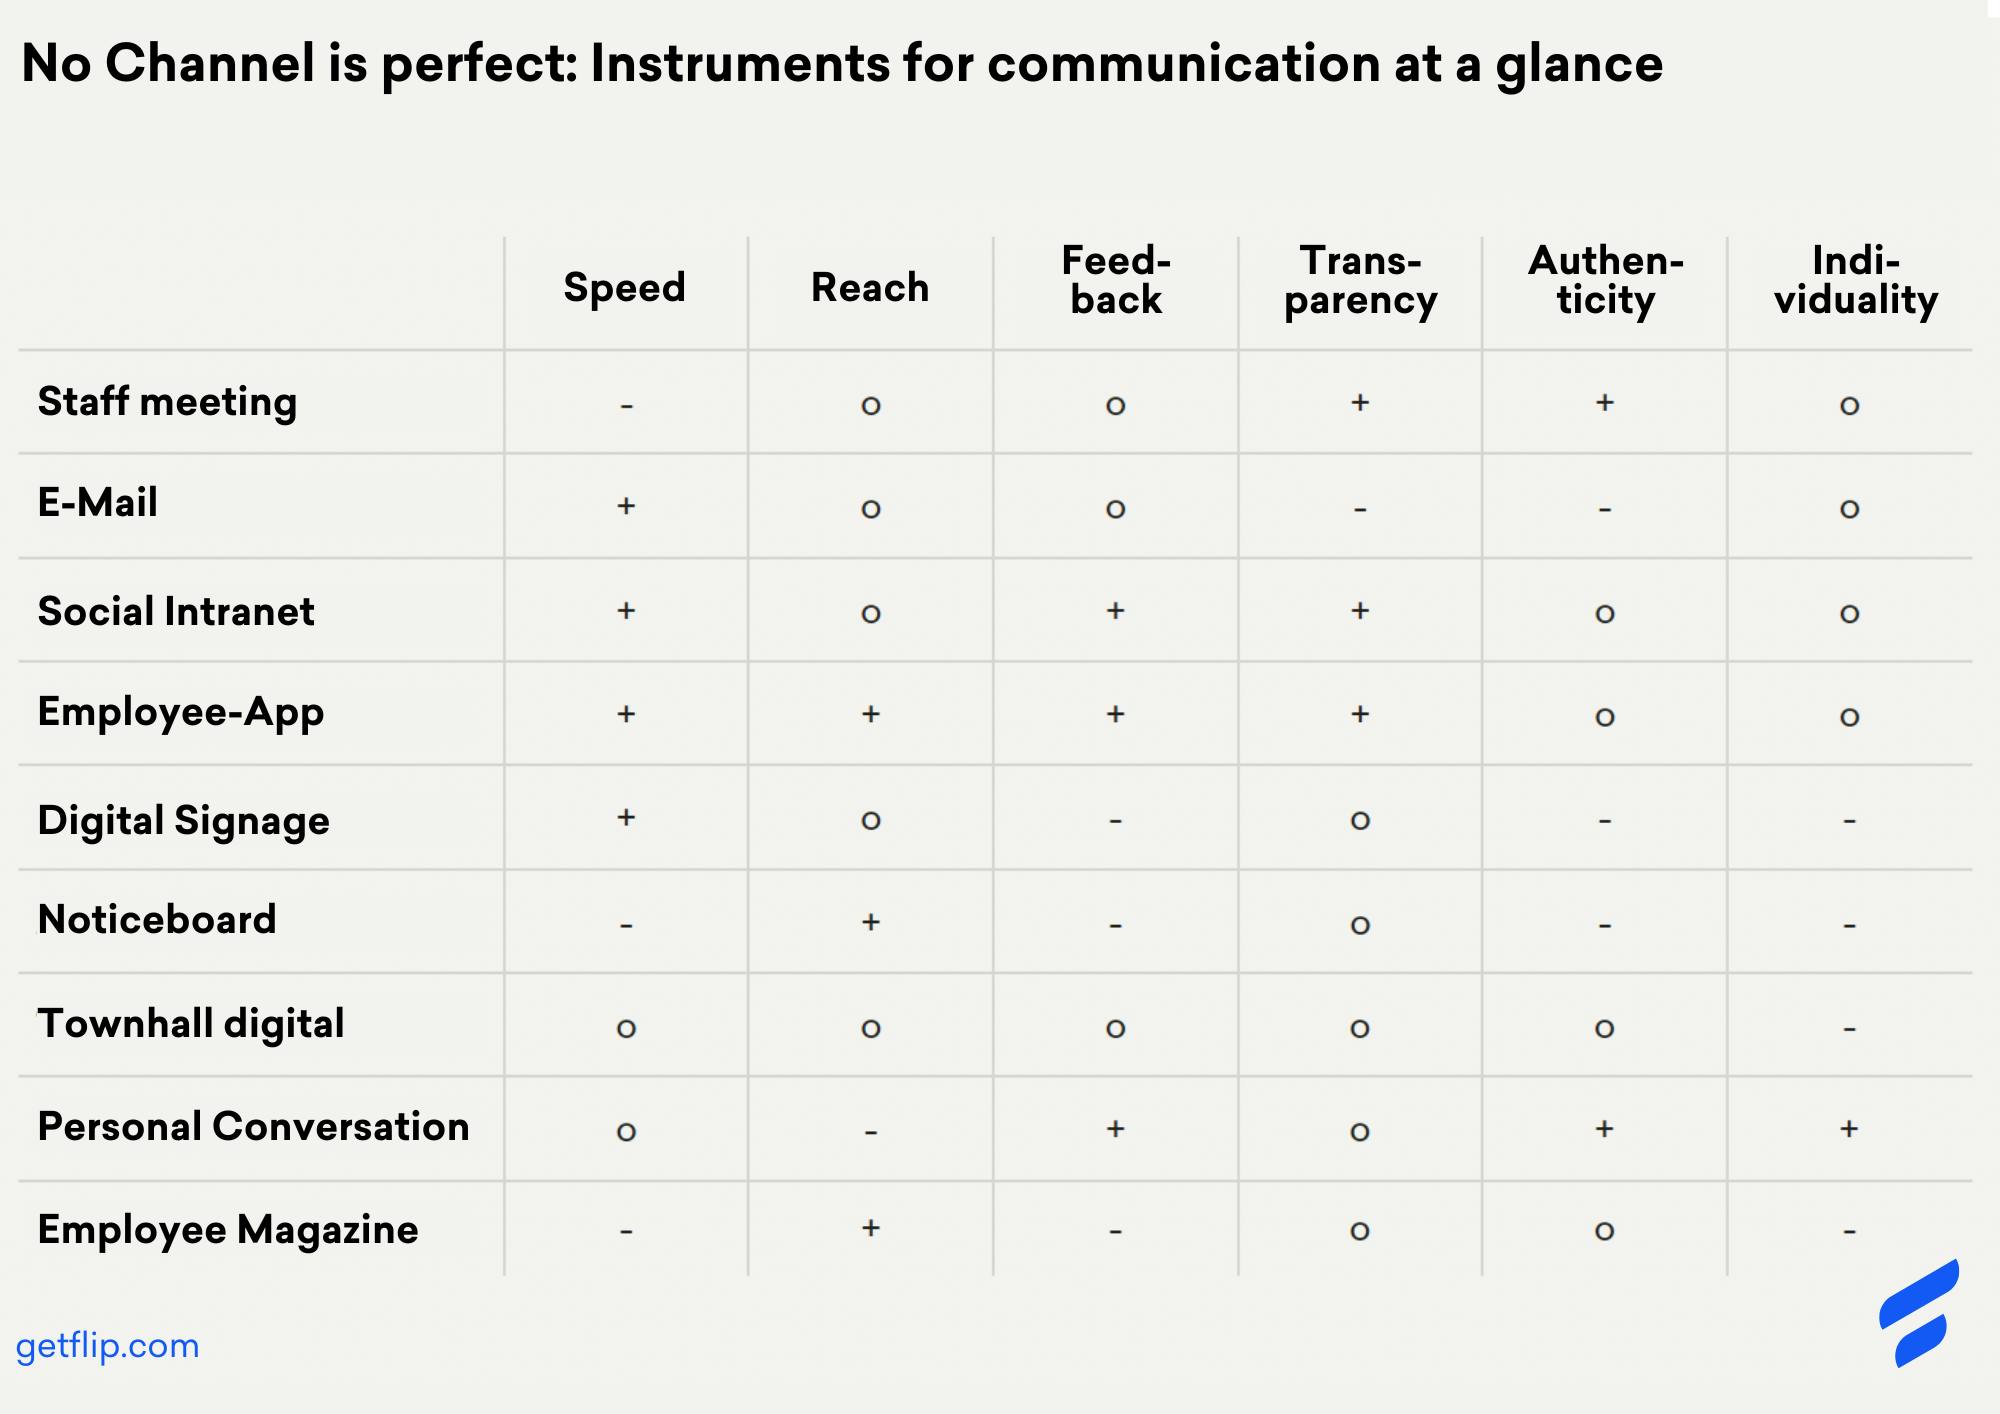 No Channel is perfect: Instruments for communication at a glance - a table